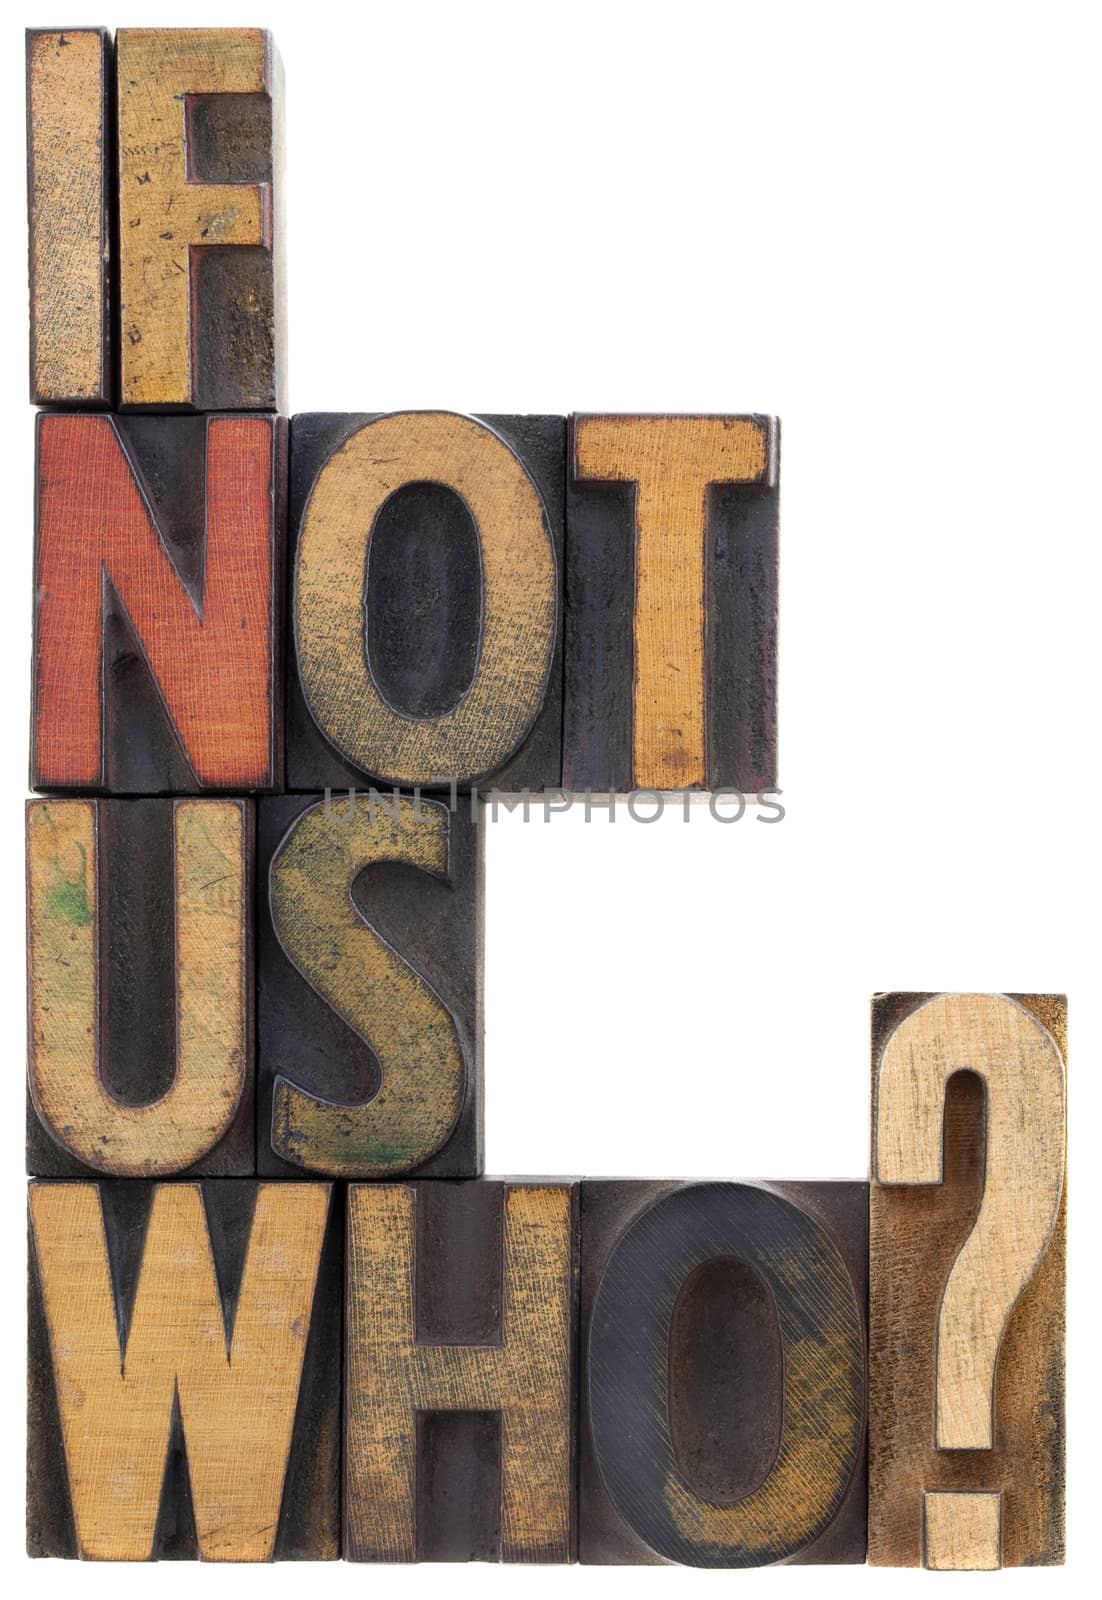 if not us, who - question in wood type by PixelsAway